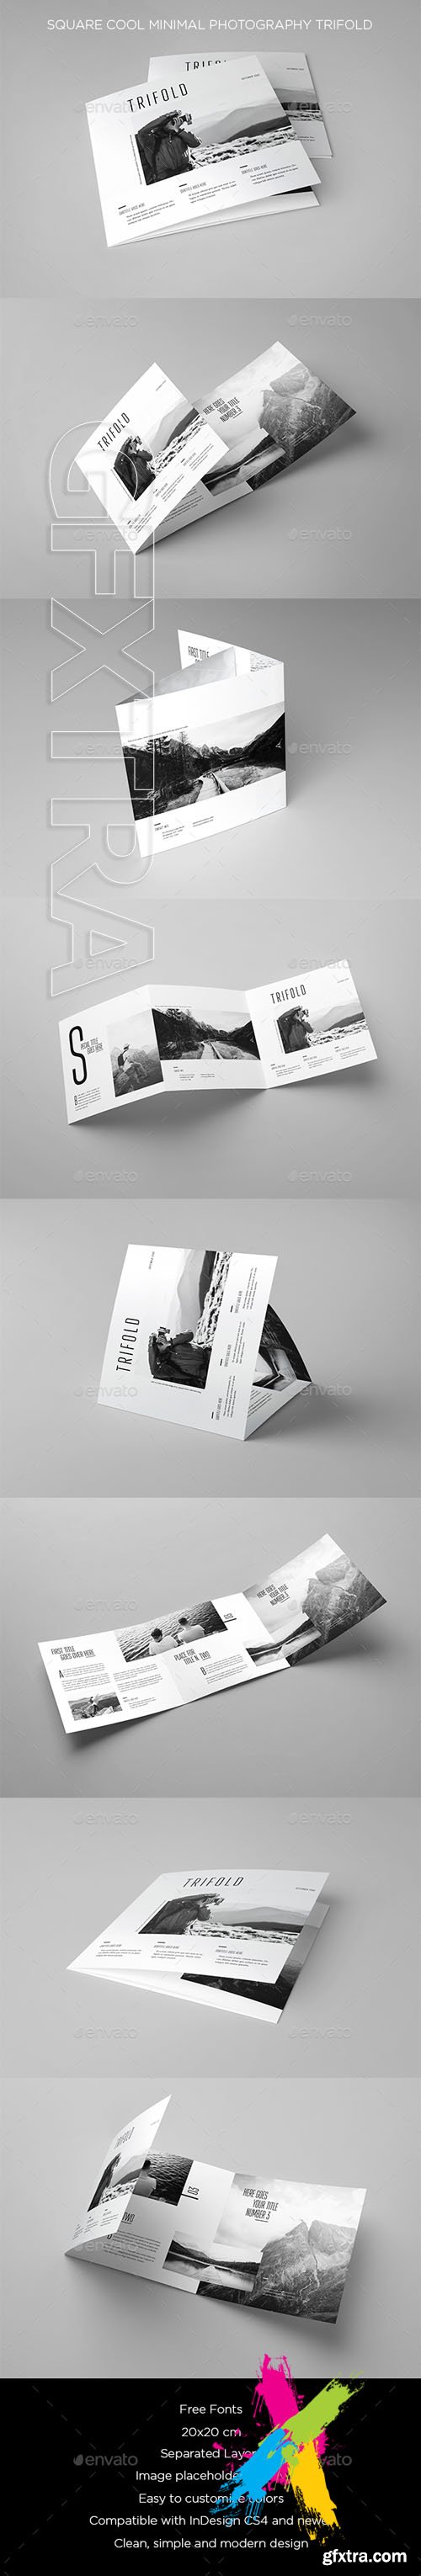 Graphicriver - Square Cool Minimal Photography Trifold 20179048